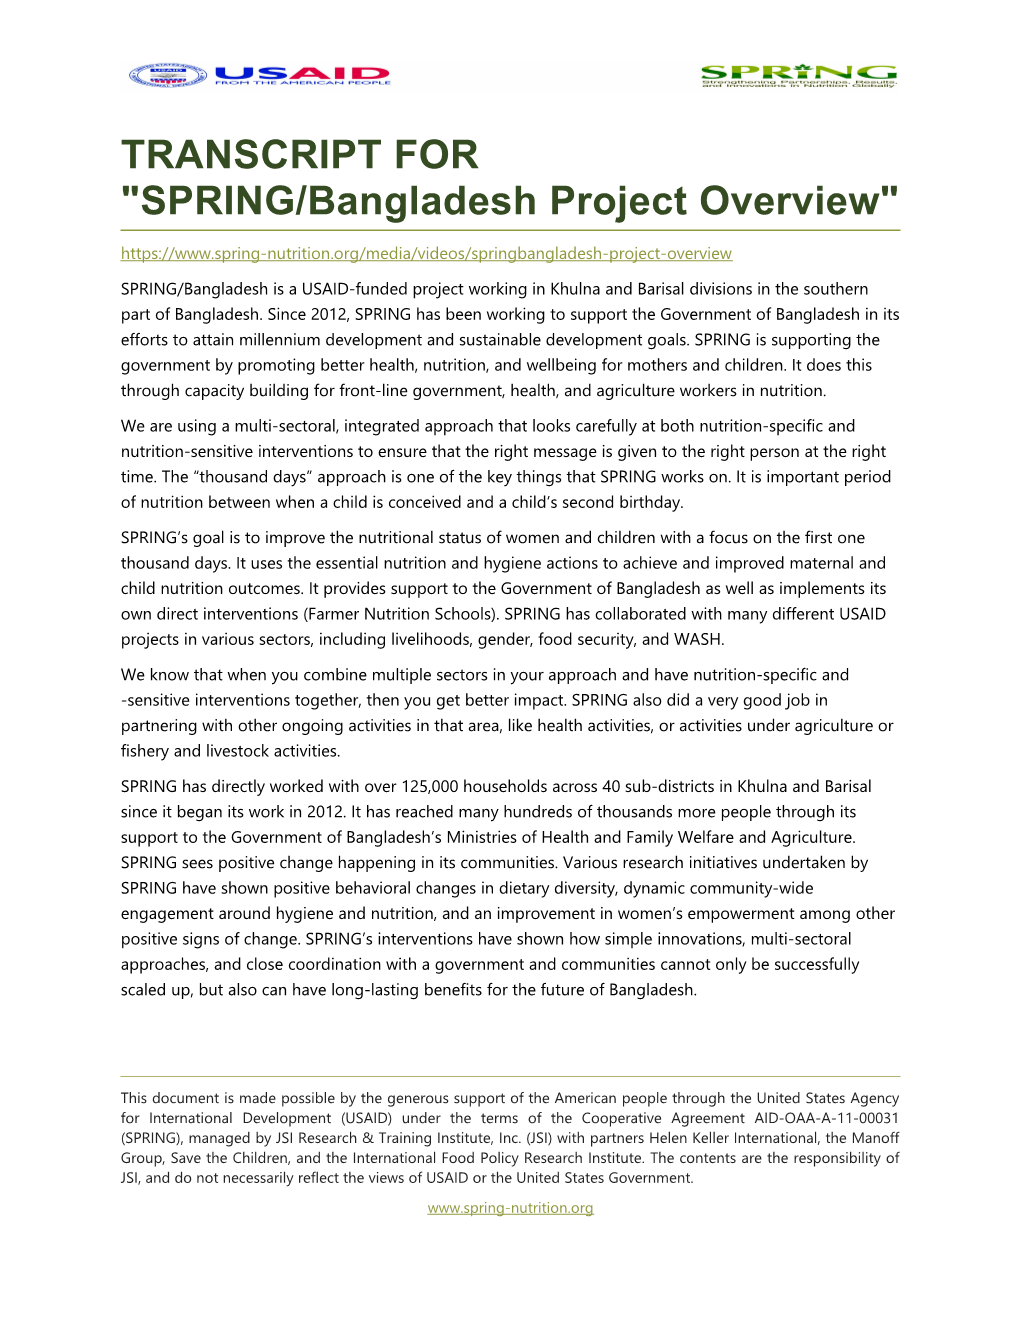 TRANSCRIPT for SPRING/Bangladesh Project Overview